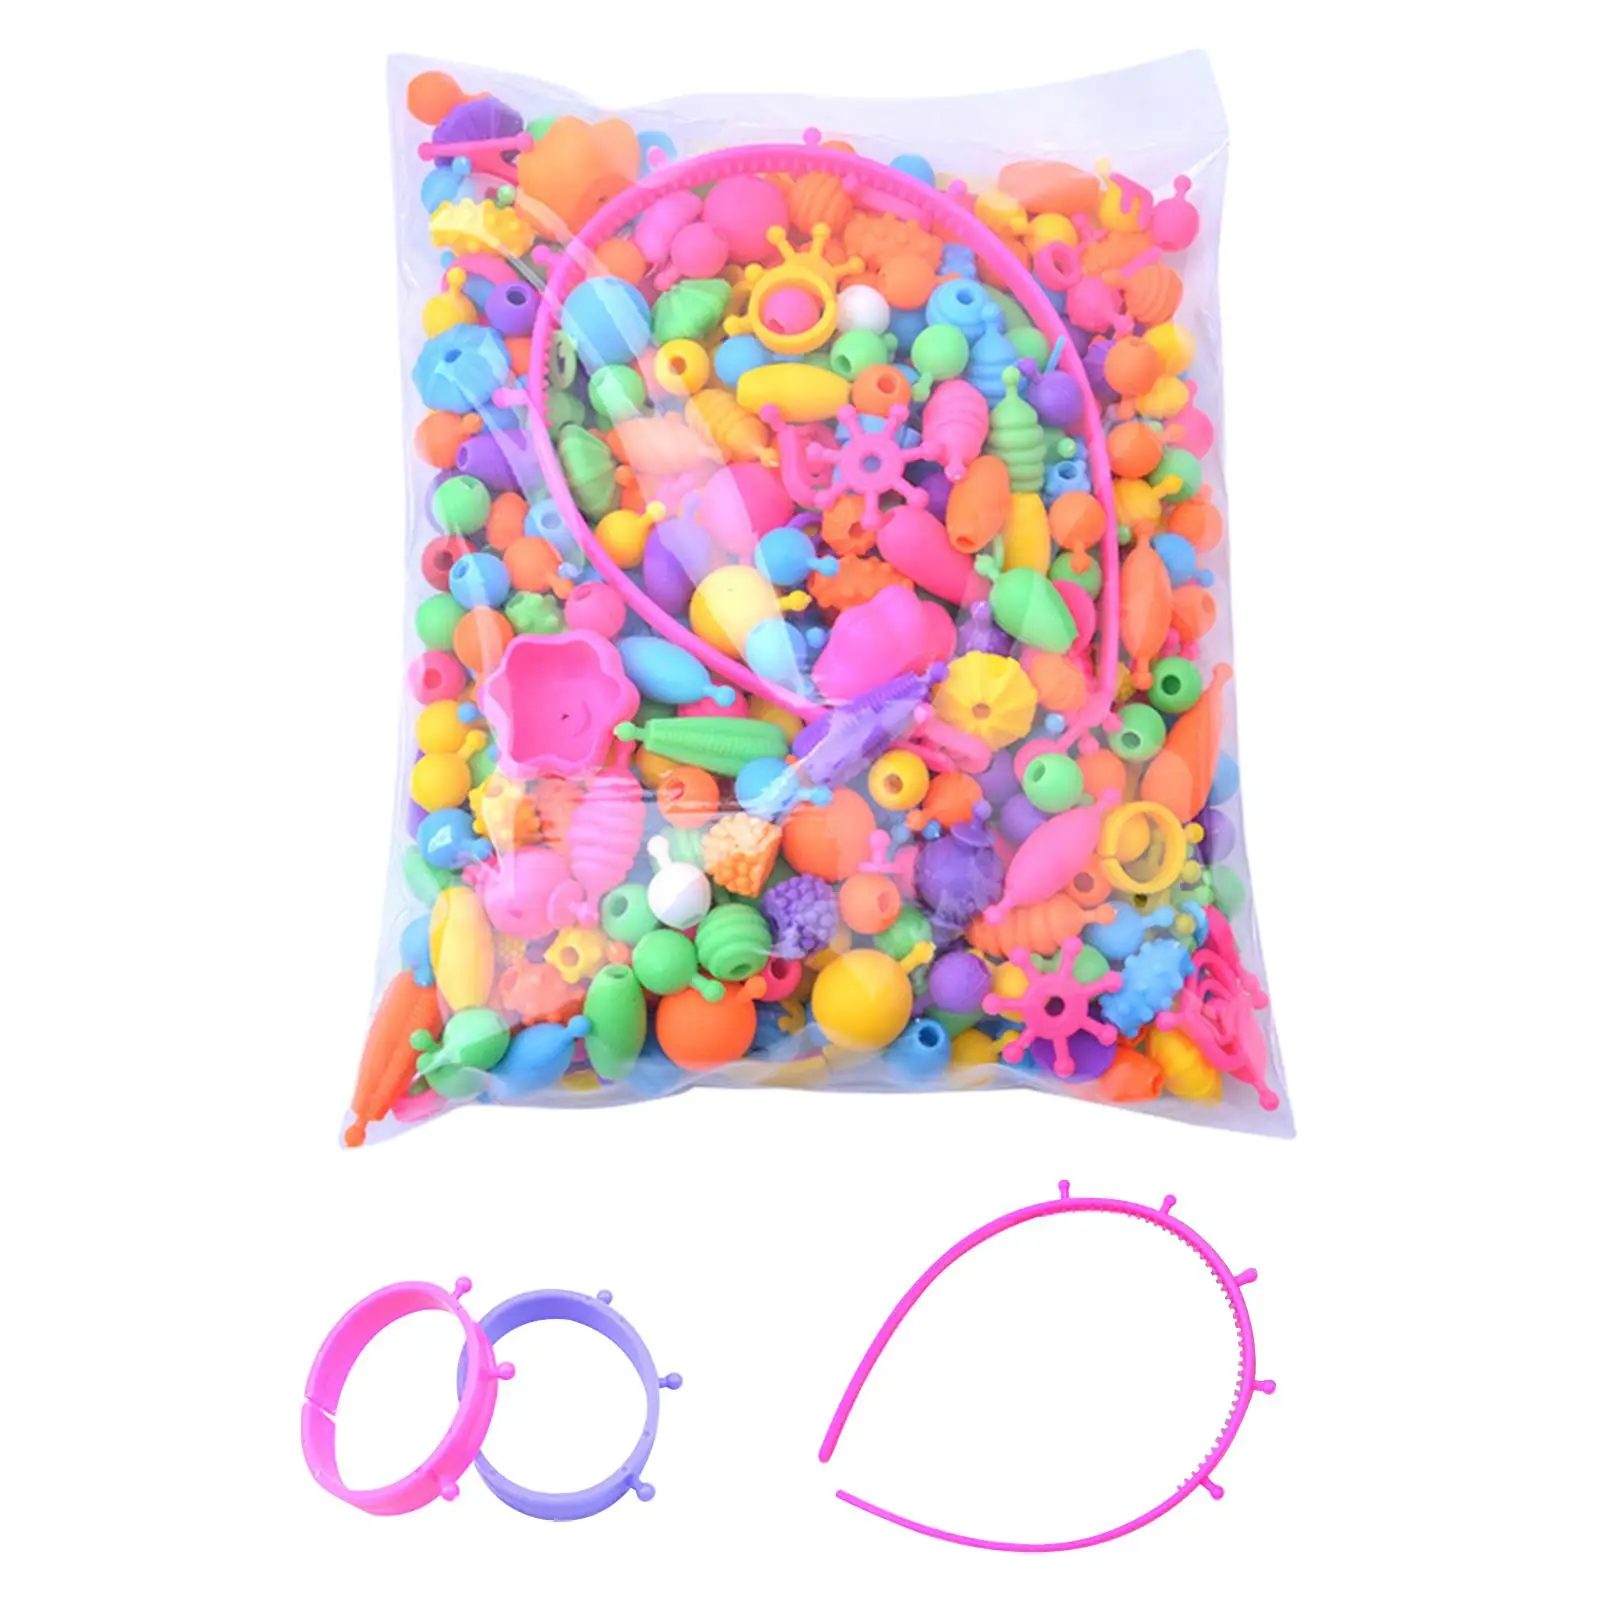 Beads Kids Jewelry Making Kit DIY Arts Jewelry Set Toys Crafts Snap Together Beads for Bracelet Necklace Hairband Earrings Girls